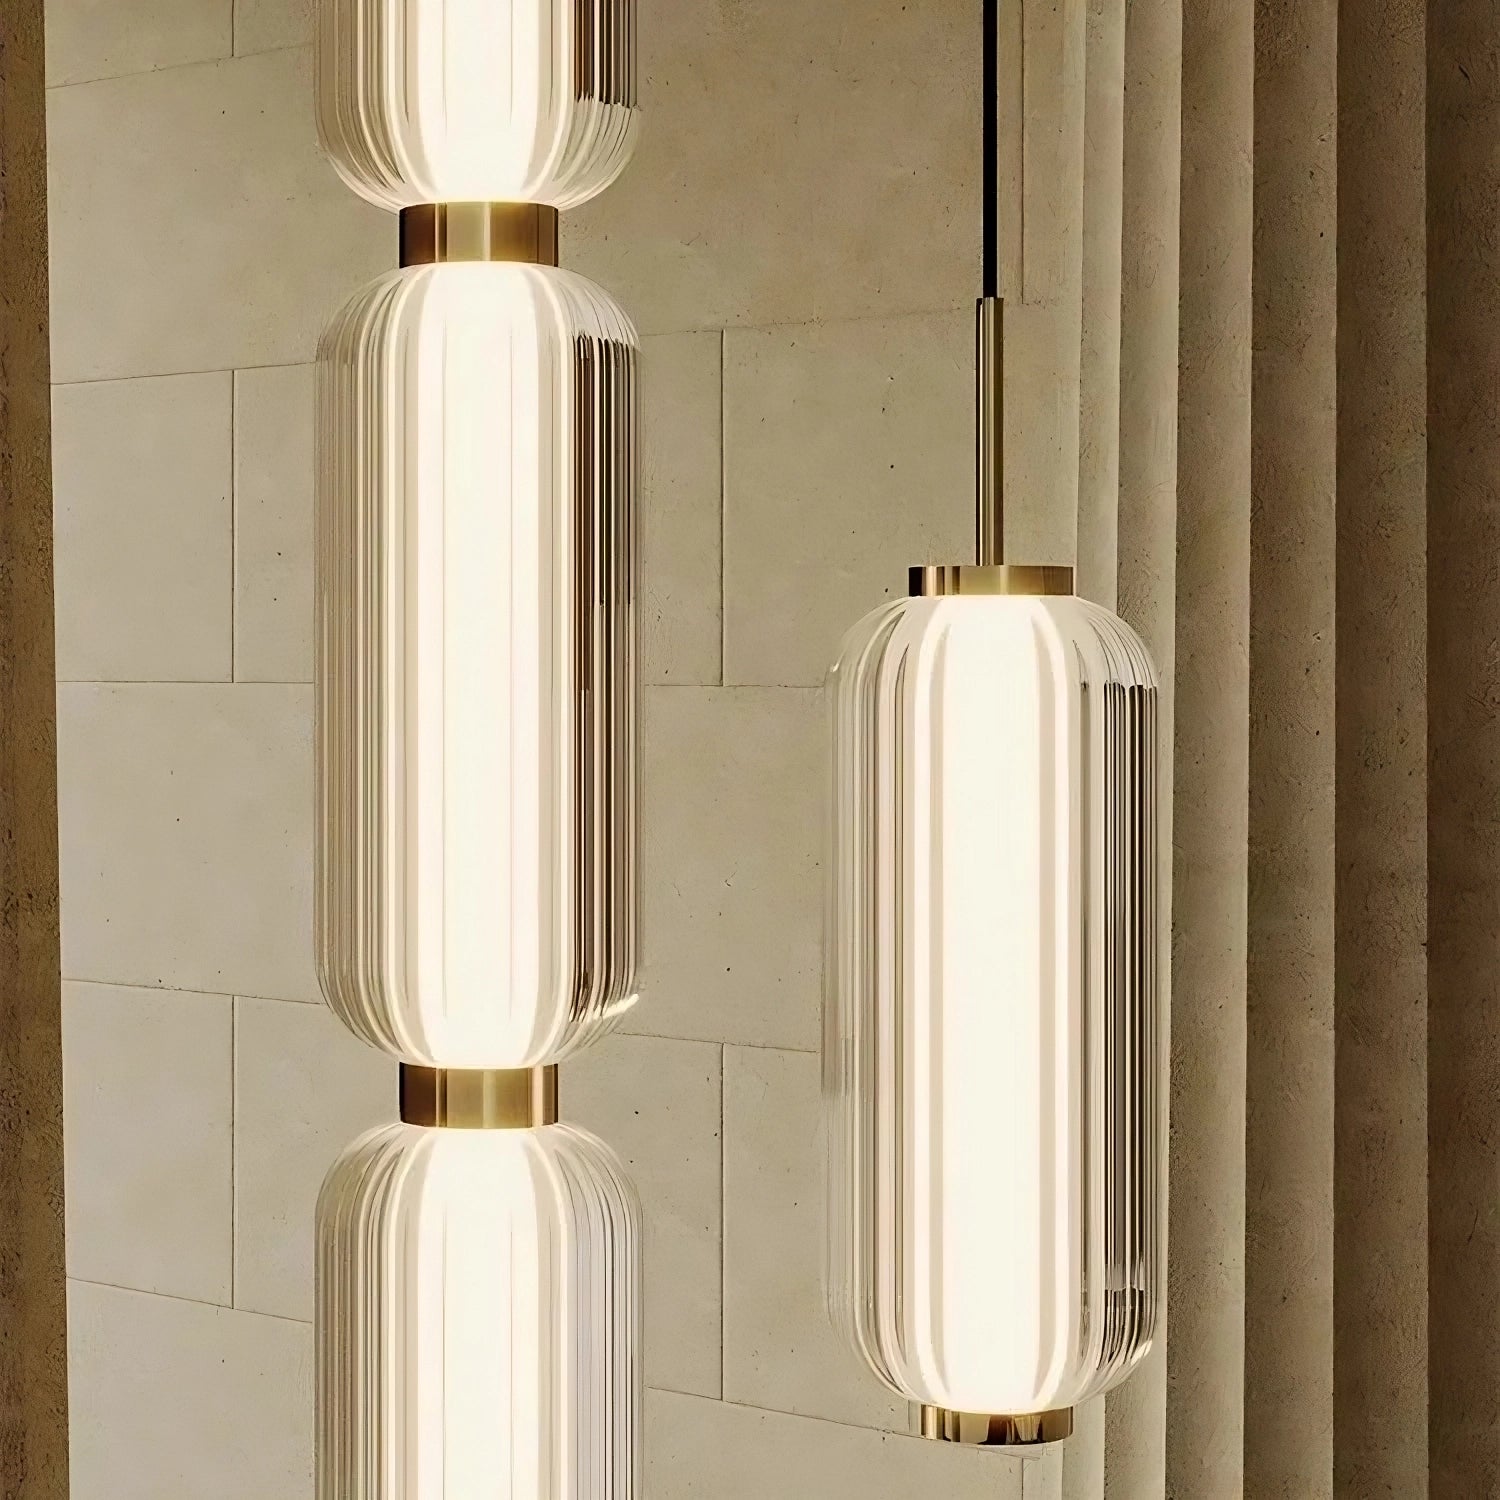 A vertical arrangement of Morsale.com's Modern Minimalist LED Pendant Light Fixtures with ribbed glass and brass accents is suspended against a textured stone wall. These pendant mount lights emit a warm, ambient glow, creating a sophisticated and elegant atmosphere reminiscent of classic marble chandeliers.